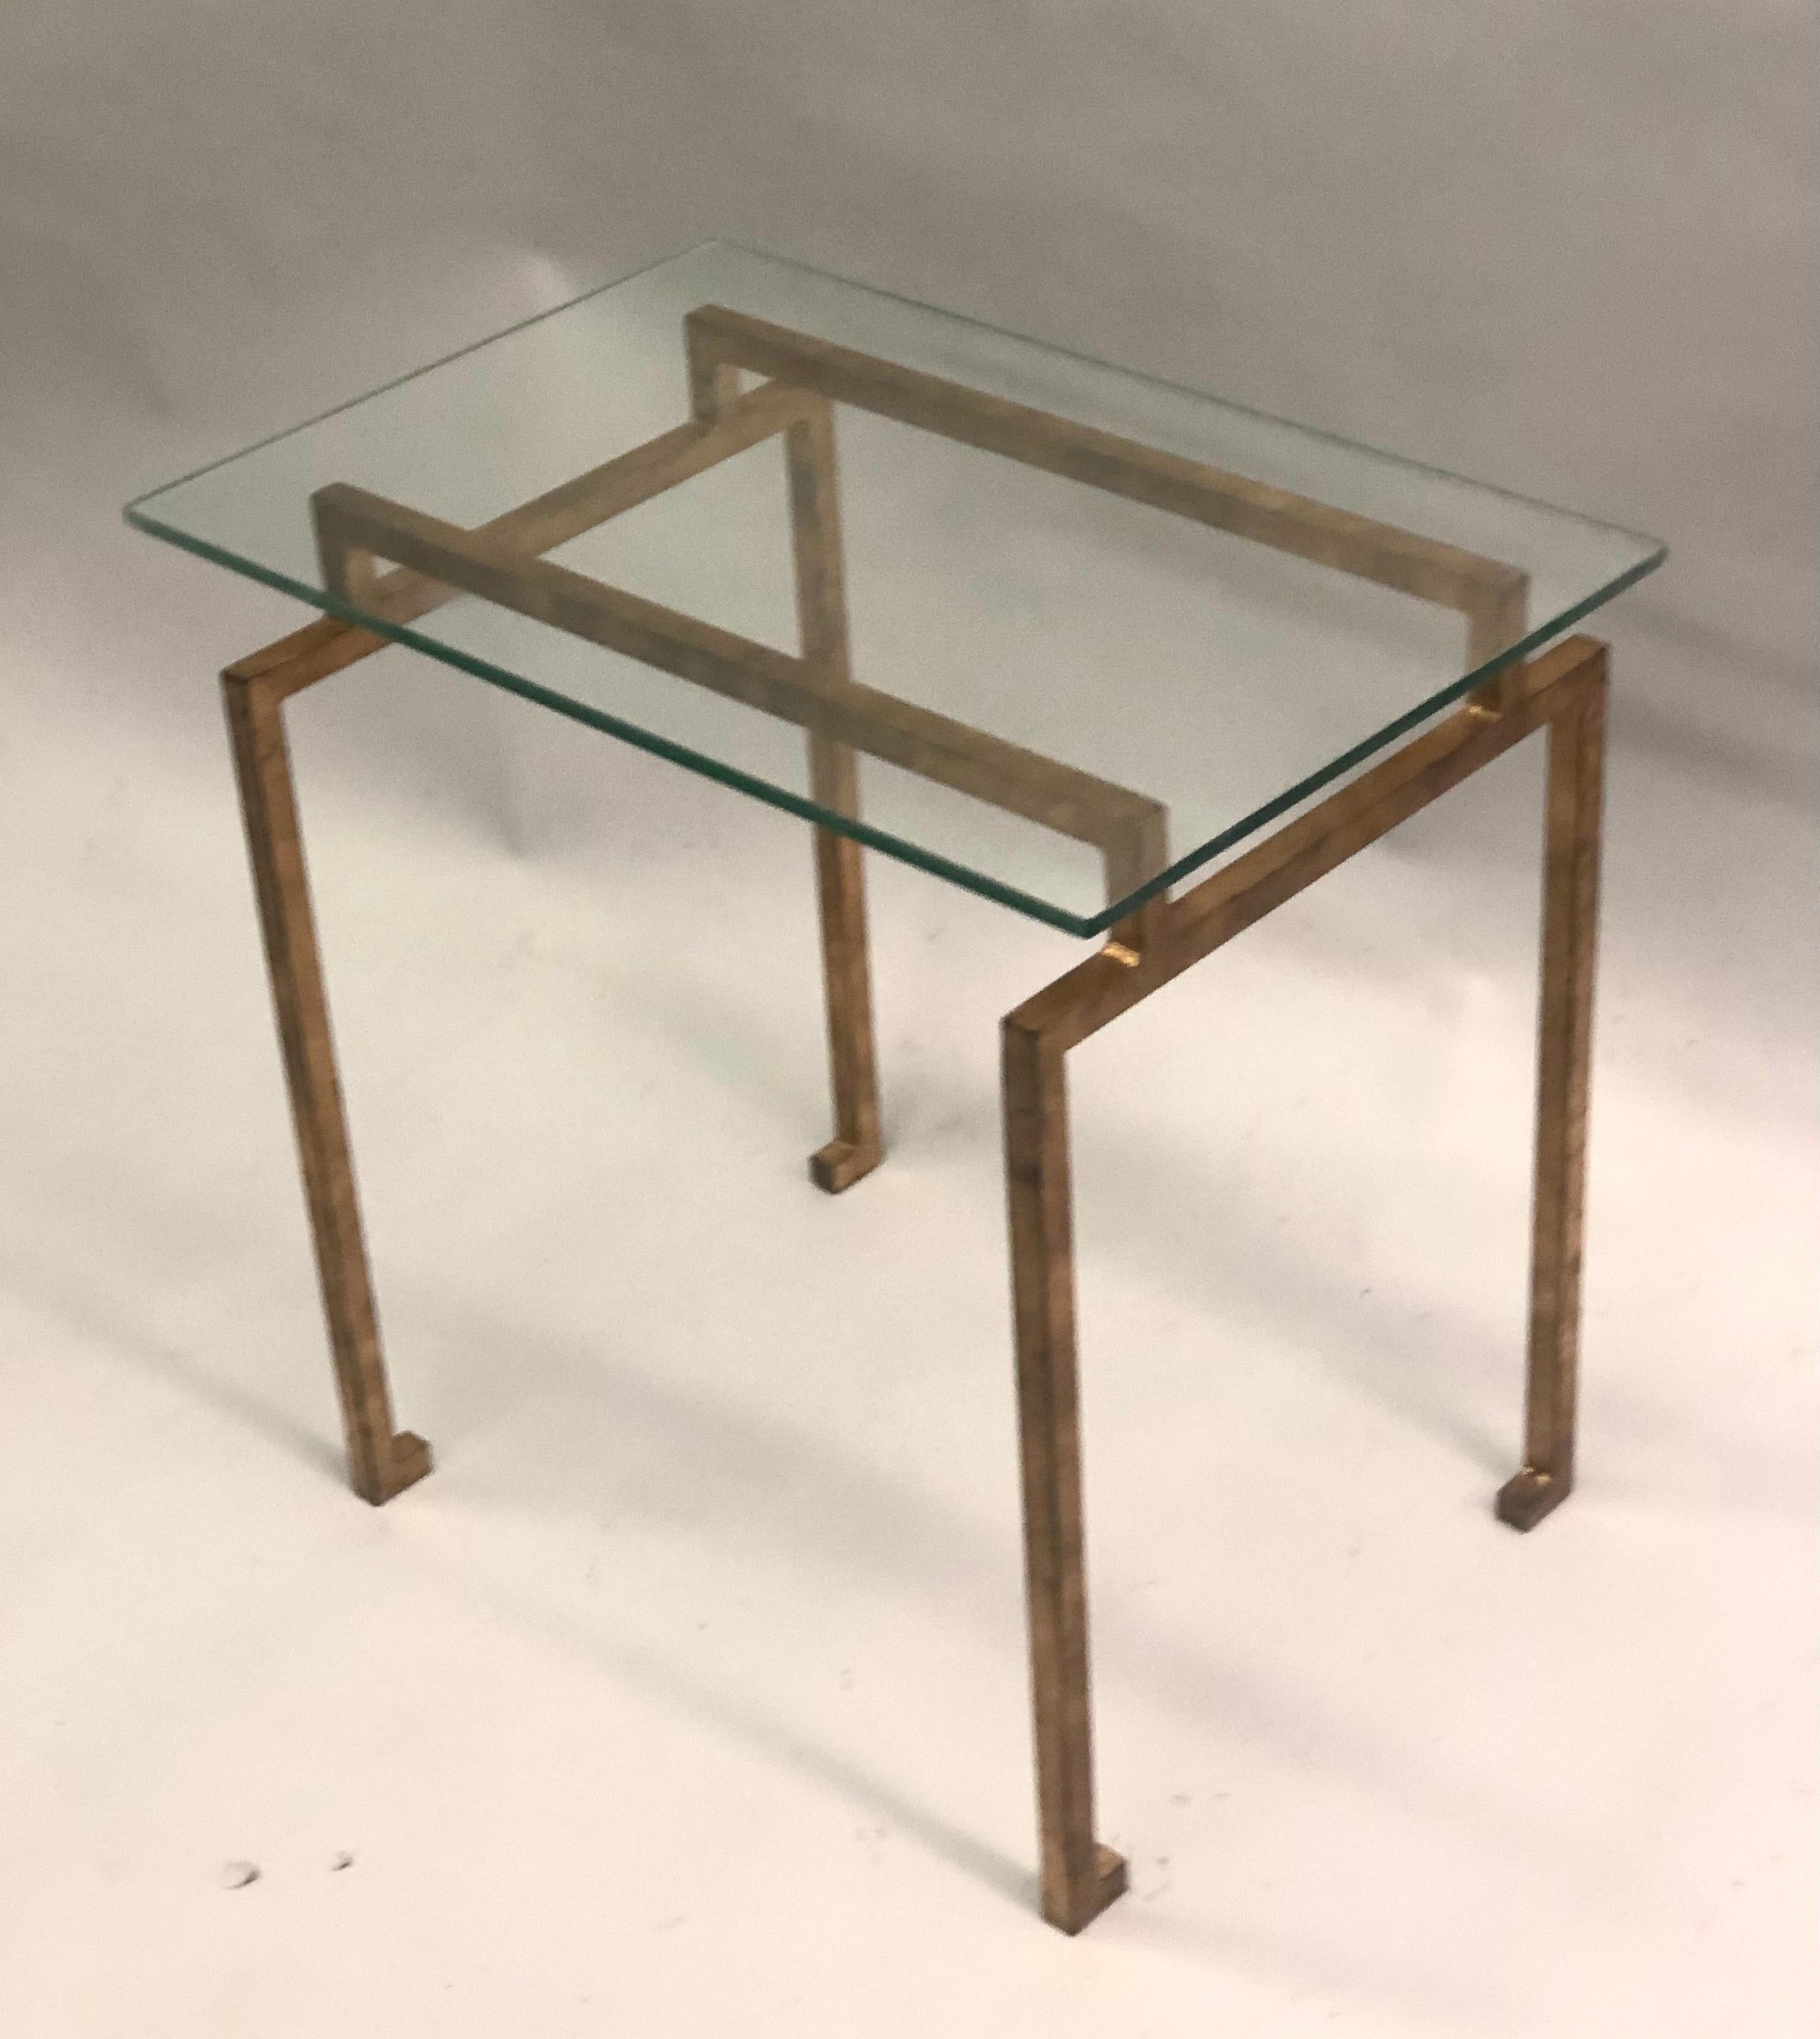 A pair of French midcentury style side or end tables in the modern neoclassical spirit. The tables are in gilt handwrought iron with delicate turned in sabots in the Egyptian taste.

Literature: Similar pair sold at Sotheby's New York, Important